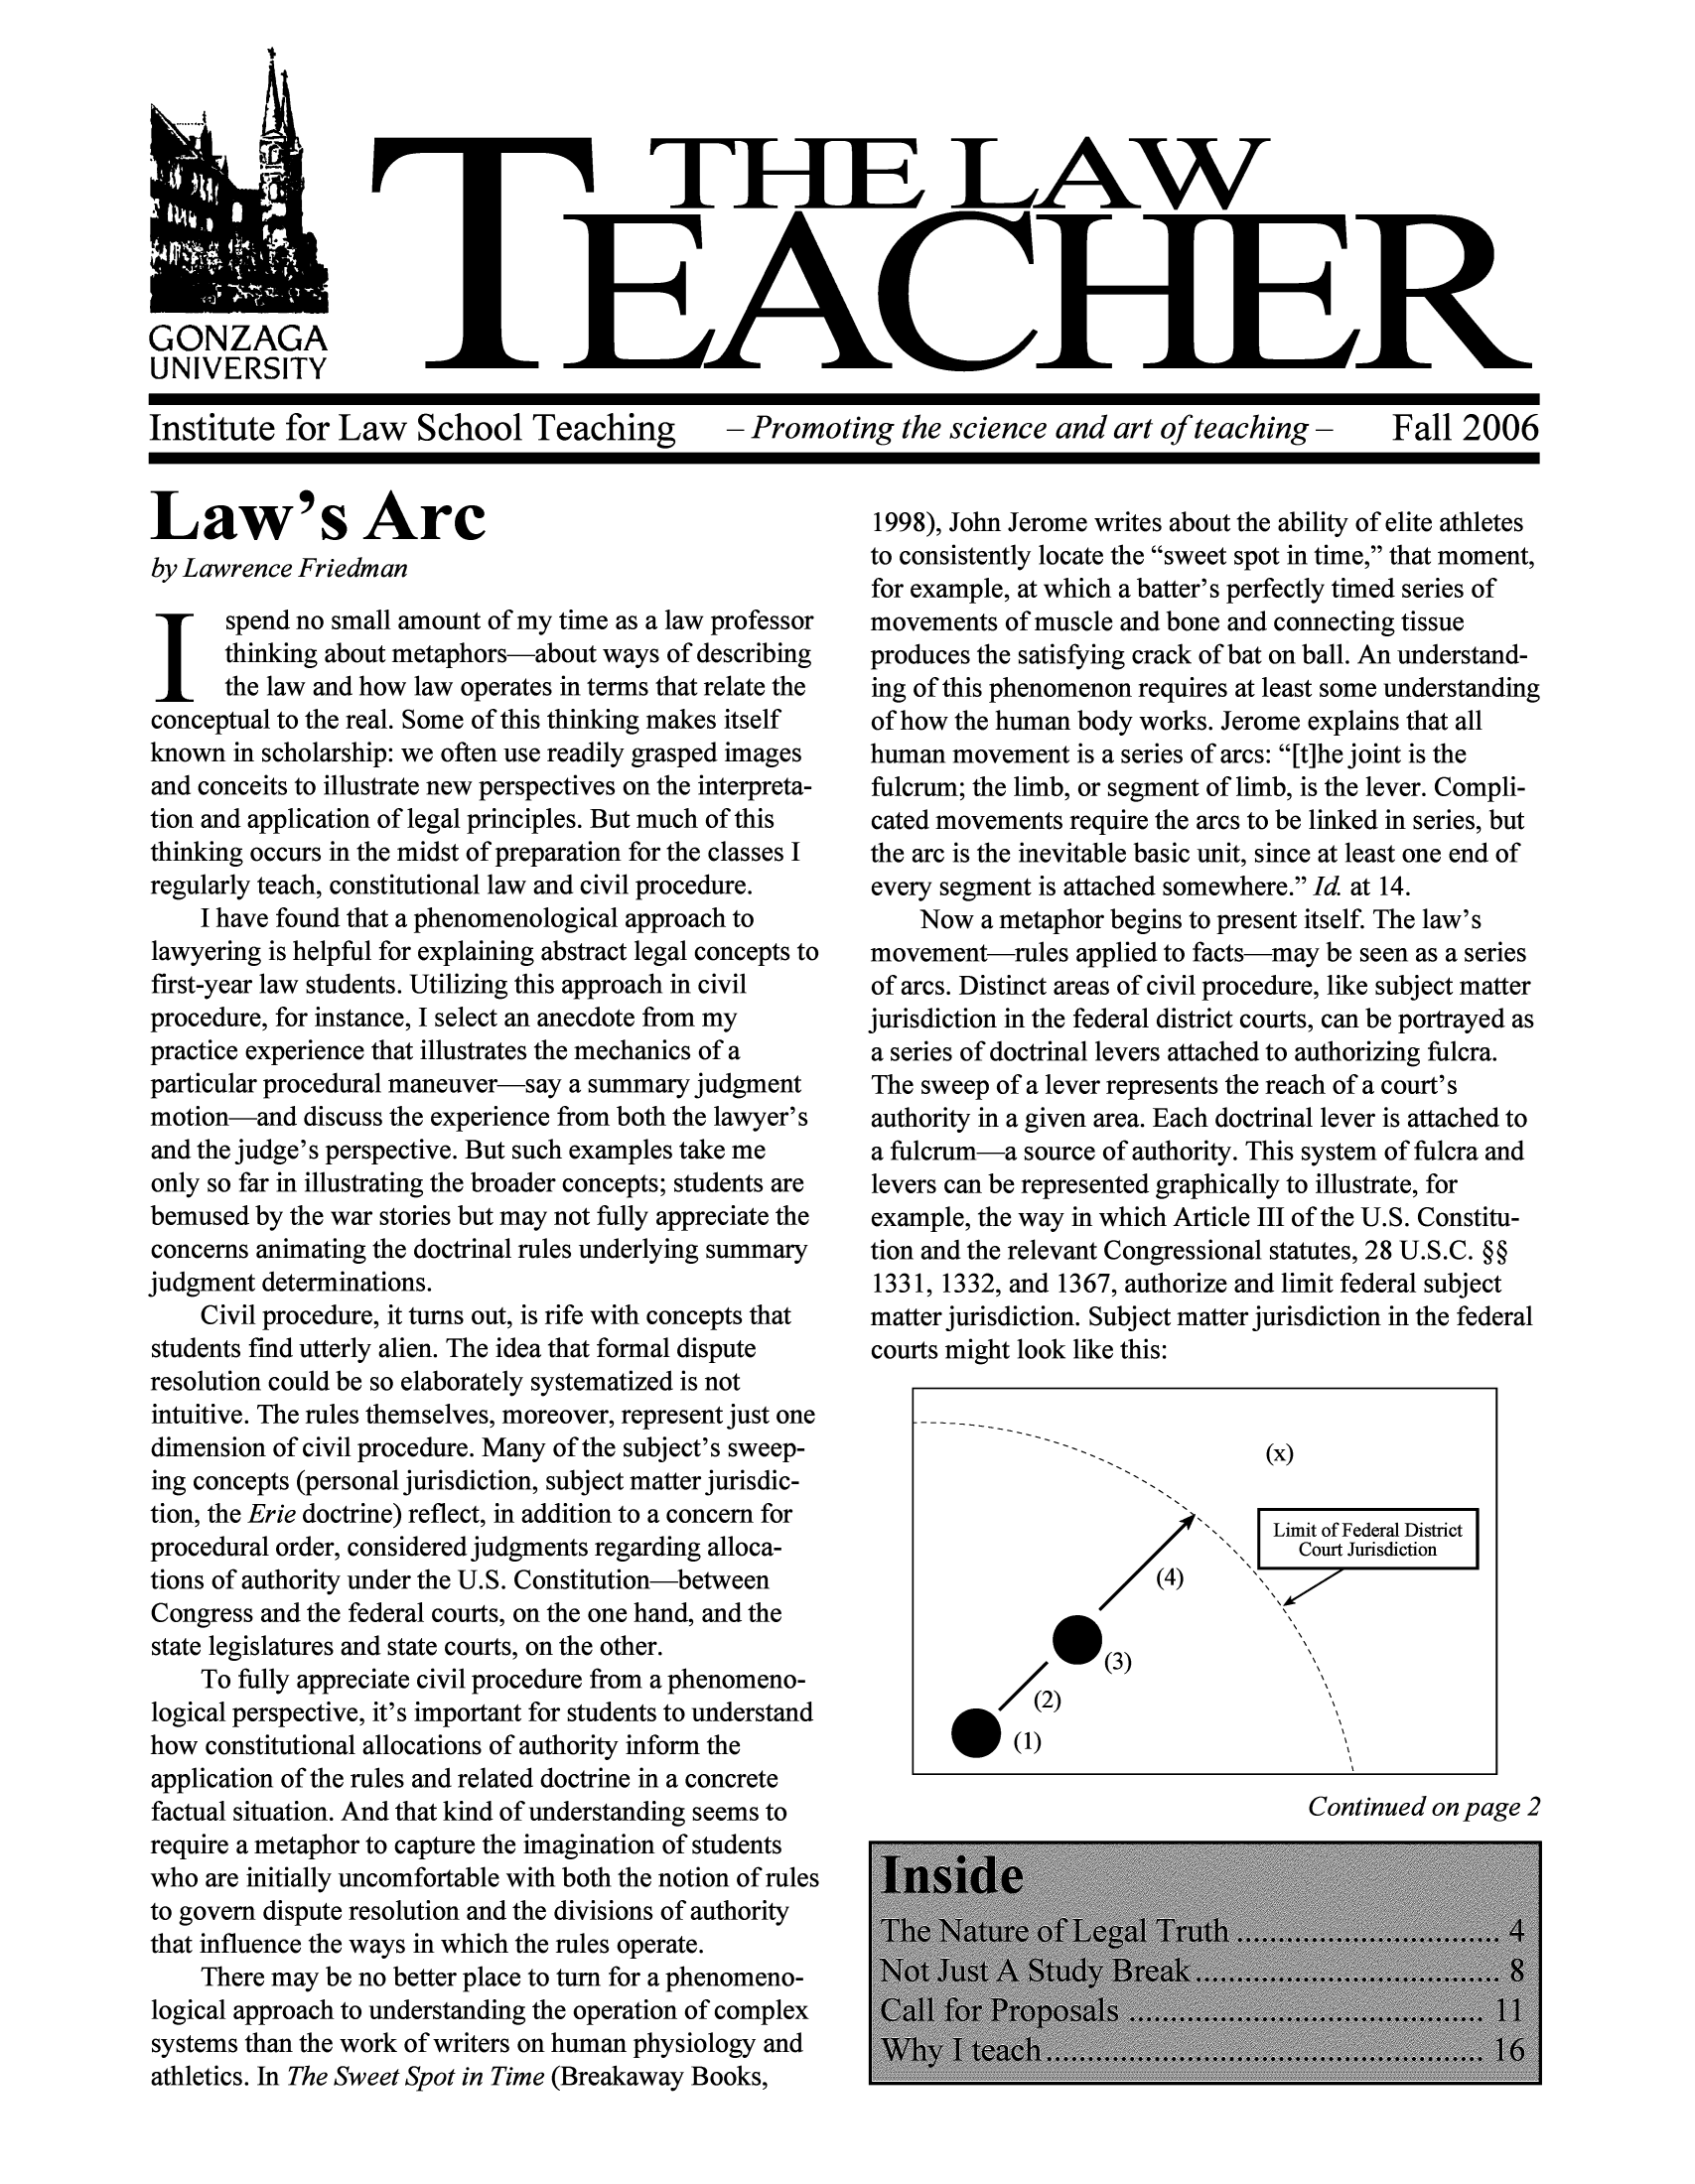 handle is hein.journals/lawteaer14 and id is 1 raw text is: THIE LAWGONZAGAUNIVERSITYInstitute for Law School Teaching  - Promoting the science and art of teaching -  Fall 2006Law's Arcby Lawrence Friedmanspend no small amount of my time as a law professorthinking about metaphors-about ways of describingthe law and how law operates in terms that relate theconceptual to the real. Some of this thinking makes itselfknown in scholarship: we often use readily grasped imagesand conceits to illustrate new perspectives on the interpreta-tion and application of legal principles. But much of thisthinking occurs in the midst of preparation for the classes Iregularly teach, constitutional law and civil procedure.I have found that a phenomenological approach tolawyering is helpful for explaining abstract legal concepts tofirst-year law students. Utilizing this approach in civilprocedure, for instance, I select an anecdote from mypractice experience that illustrates the mechanics of aparticular procedural maneuver-say a summary judgmentmotion-and discuss the experience from both the lawyer'sand the judge's perspective. But such examples take meonly so far in illustrating the broader concepts; students arebemused by the war stories but may not fully appreciate theconcerns animating the doctrinal rules underlying summaryjudgment determinations.Civil procedure, it turns out, is rife with concepts thatstudents find utterly alien. The idea that formal disputeresolution could be so elaborately systematized is notintuitive. The rules themselves, moreover, represent just onedimension of civil procedure. Many of the subject's sweep-ing concepts (personal jurisdiction, subject matter jurisdic-tion, the Erie doctrine) reflect, in addition to a concern forprocedural order, considered judgments regarding alloca-tions of authority under the U.S. Constitution-betweenCongress and the federal courts, on the one hand, and thestate legislatures and state courts, on the other.To fully appreciate civil procedure from a phenomeno-logical perspective, it's important for students to understandhow constitutional allocations of authority inform theapplication of the rules and related doctrine in a concretefactual situation. And that kind of understanding seems torequire a metaphor to capture the imagination of studentswho are initially uncomfortable with both the notion of rulesto govern dispute resolution and the divisions of authoritythat influence the ways in which the rules operate.There may be no better place to turn for a phenomeno-logical approach to understanding the operation of complexsystems than the work of writers on human physiology andathletics. In The Sweet Spot in Time (Breakaway Books,1998), John Jerome writes about the ability of elite athletesto consistently locate the sweet spot in time, that moment,for example, at which a batter's perfectly timed series ofmovements of muscle and bone and connecting tissueproduces the satisfying crack of bat on ball. An understand-ing of this phenomenon requires at least some understandingof how the human body works. Jerome explains that allhuman movement is a series of arcs: [t]he joint is thefulcrum; the limb, or segment of limb, is the lever. Compli-cated movements require the arcs to be linked in series, butthe arc is the inevitable basic unit, since at least one end ofevery segment is attached somewhere. Id at 14.Now a metaphor begins to present itself. The law'smovement-rules applied to facts-may be seen as a seriesof arcs. Distinct areas of civil procedure, like subject matterjurisdiction in the federal district courts, can be portrayed asa series of doctrinal levers attached to authorizing fulcra.The sweep of a lever represents the reach of a court'sauthority in a given area. Each doctrinal lever is attached toa fulcrum-a source of authority. This system of fulcra andlevers can be represented graphically to illustrate, forexample, the way in which Article III of the U.S. Constitu-tion and the relevant Congressional statutes, 28 U.S.C. §§1331, 1332, and 1367, authorize and limit federal subjectmatter jurisdiction. Subject matter jurisdiction in the federalcourts might look like this:Limit of Federal DistrictCourt Jurisdiction0(3)O/(2)(1)Continued on page 2